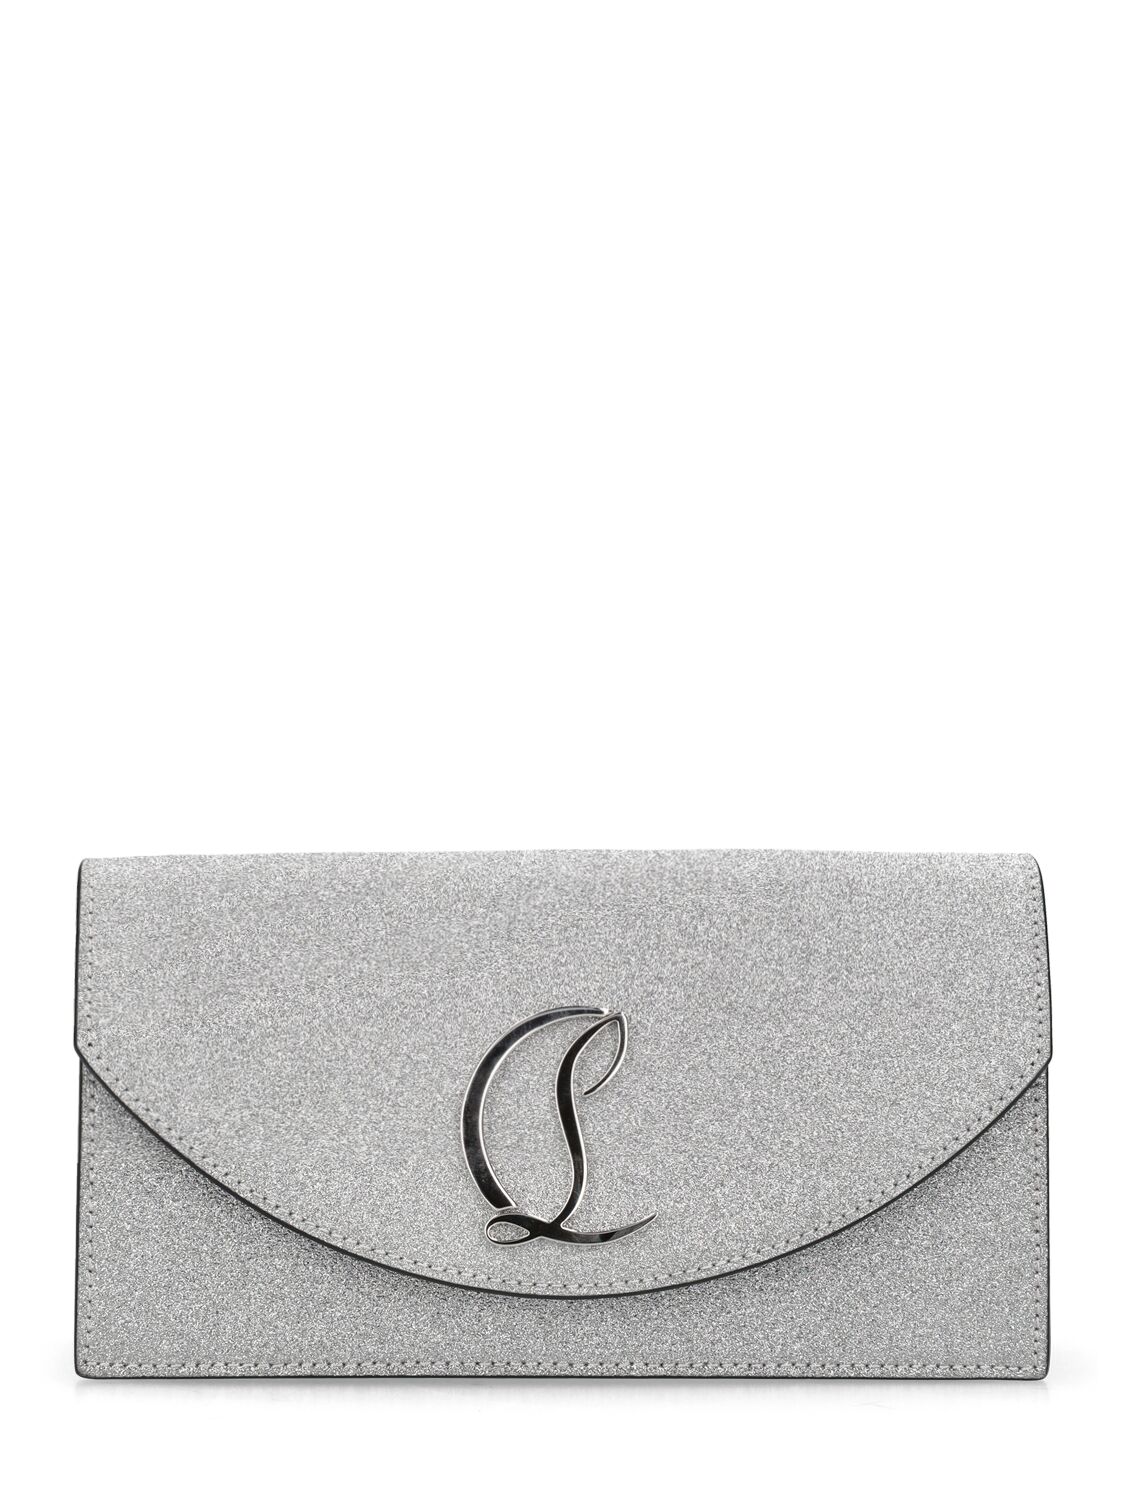 Christian Louboutin Small Logo Glittered Leather Clutch In Silver